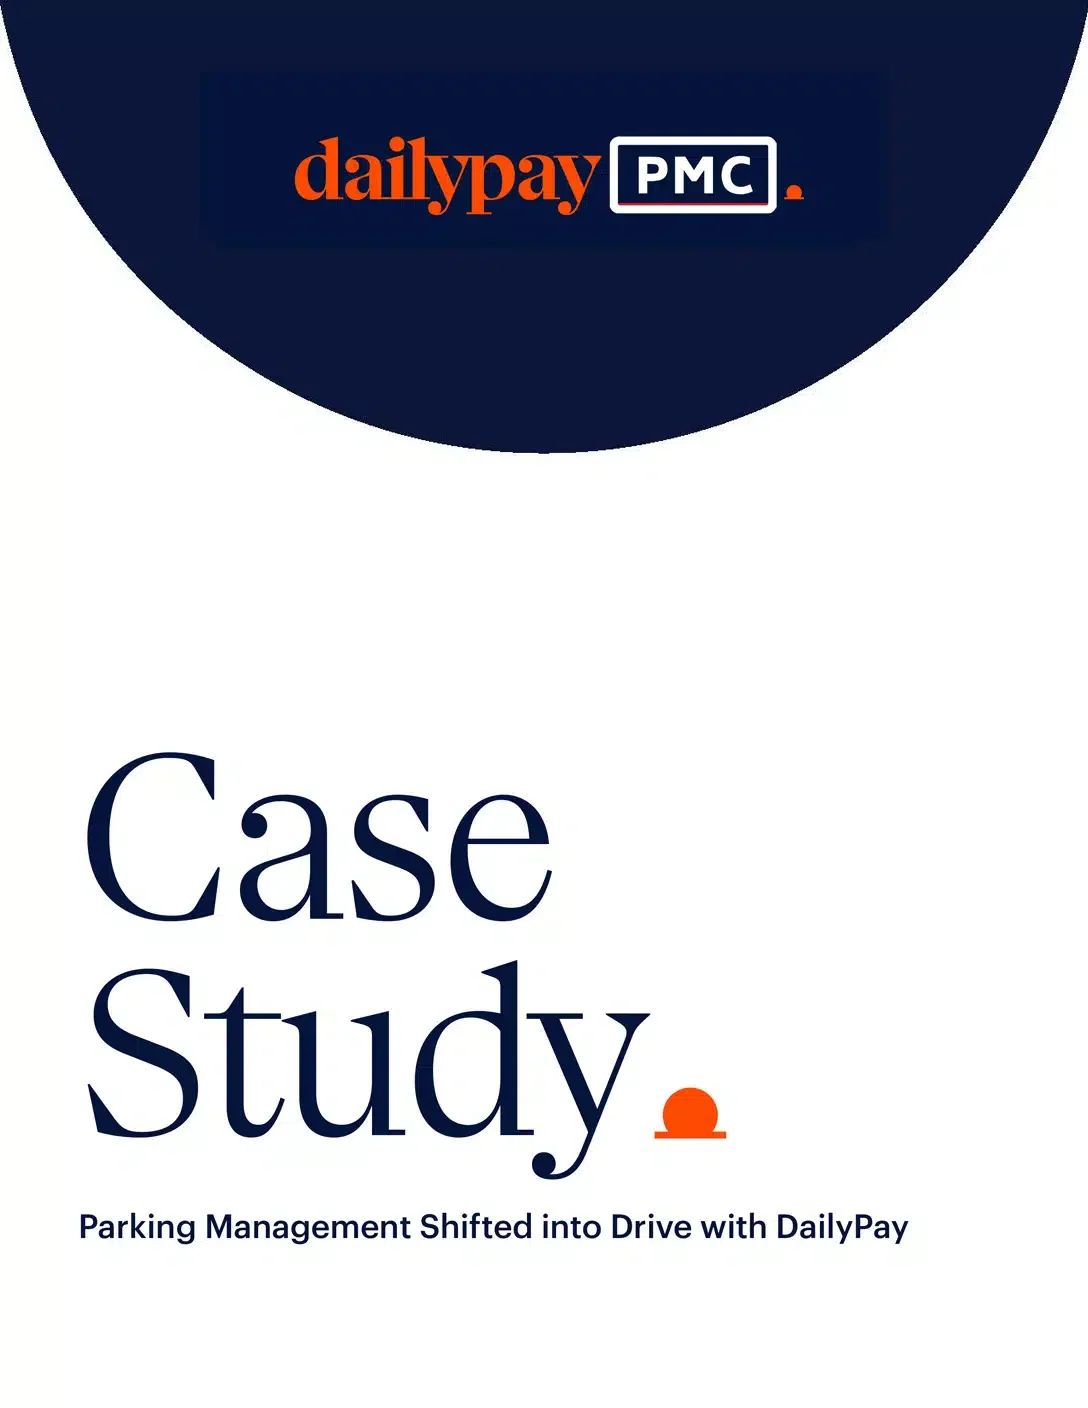 Cover of a case study titled "Parking Management Shifted into Drive with DailyPay," featuring the DailyPay and PMC logos at the top.